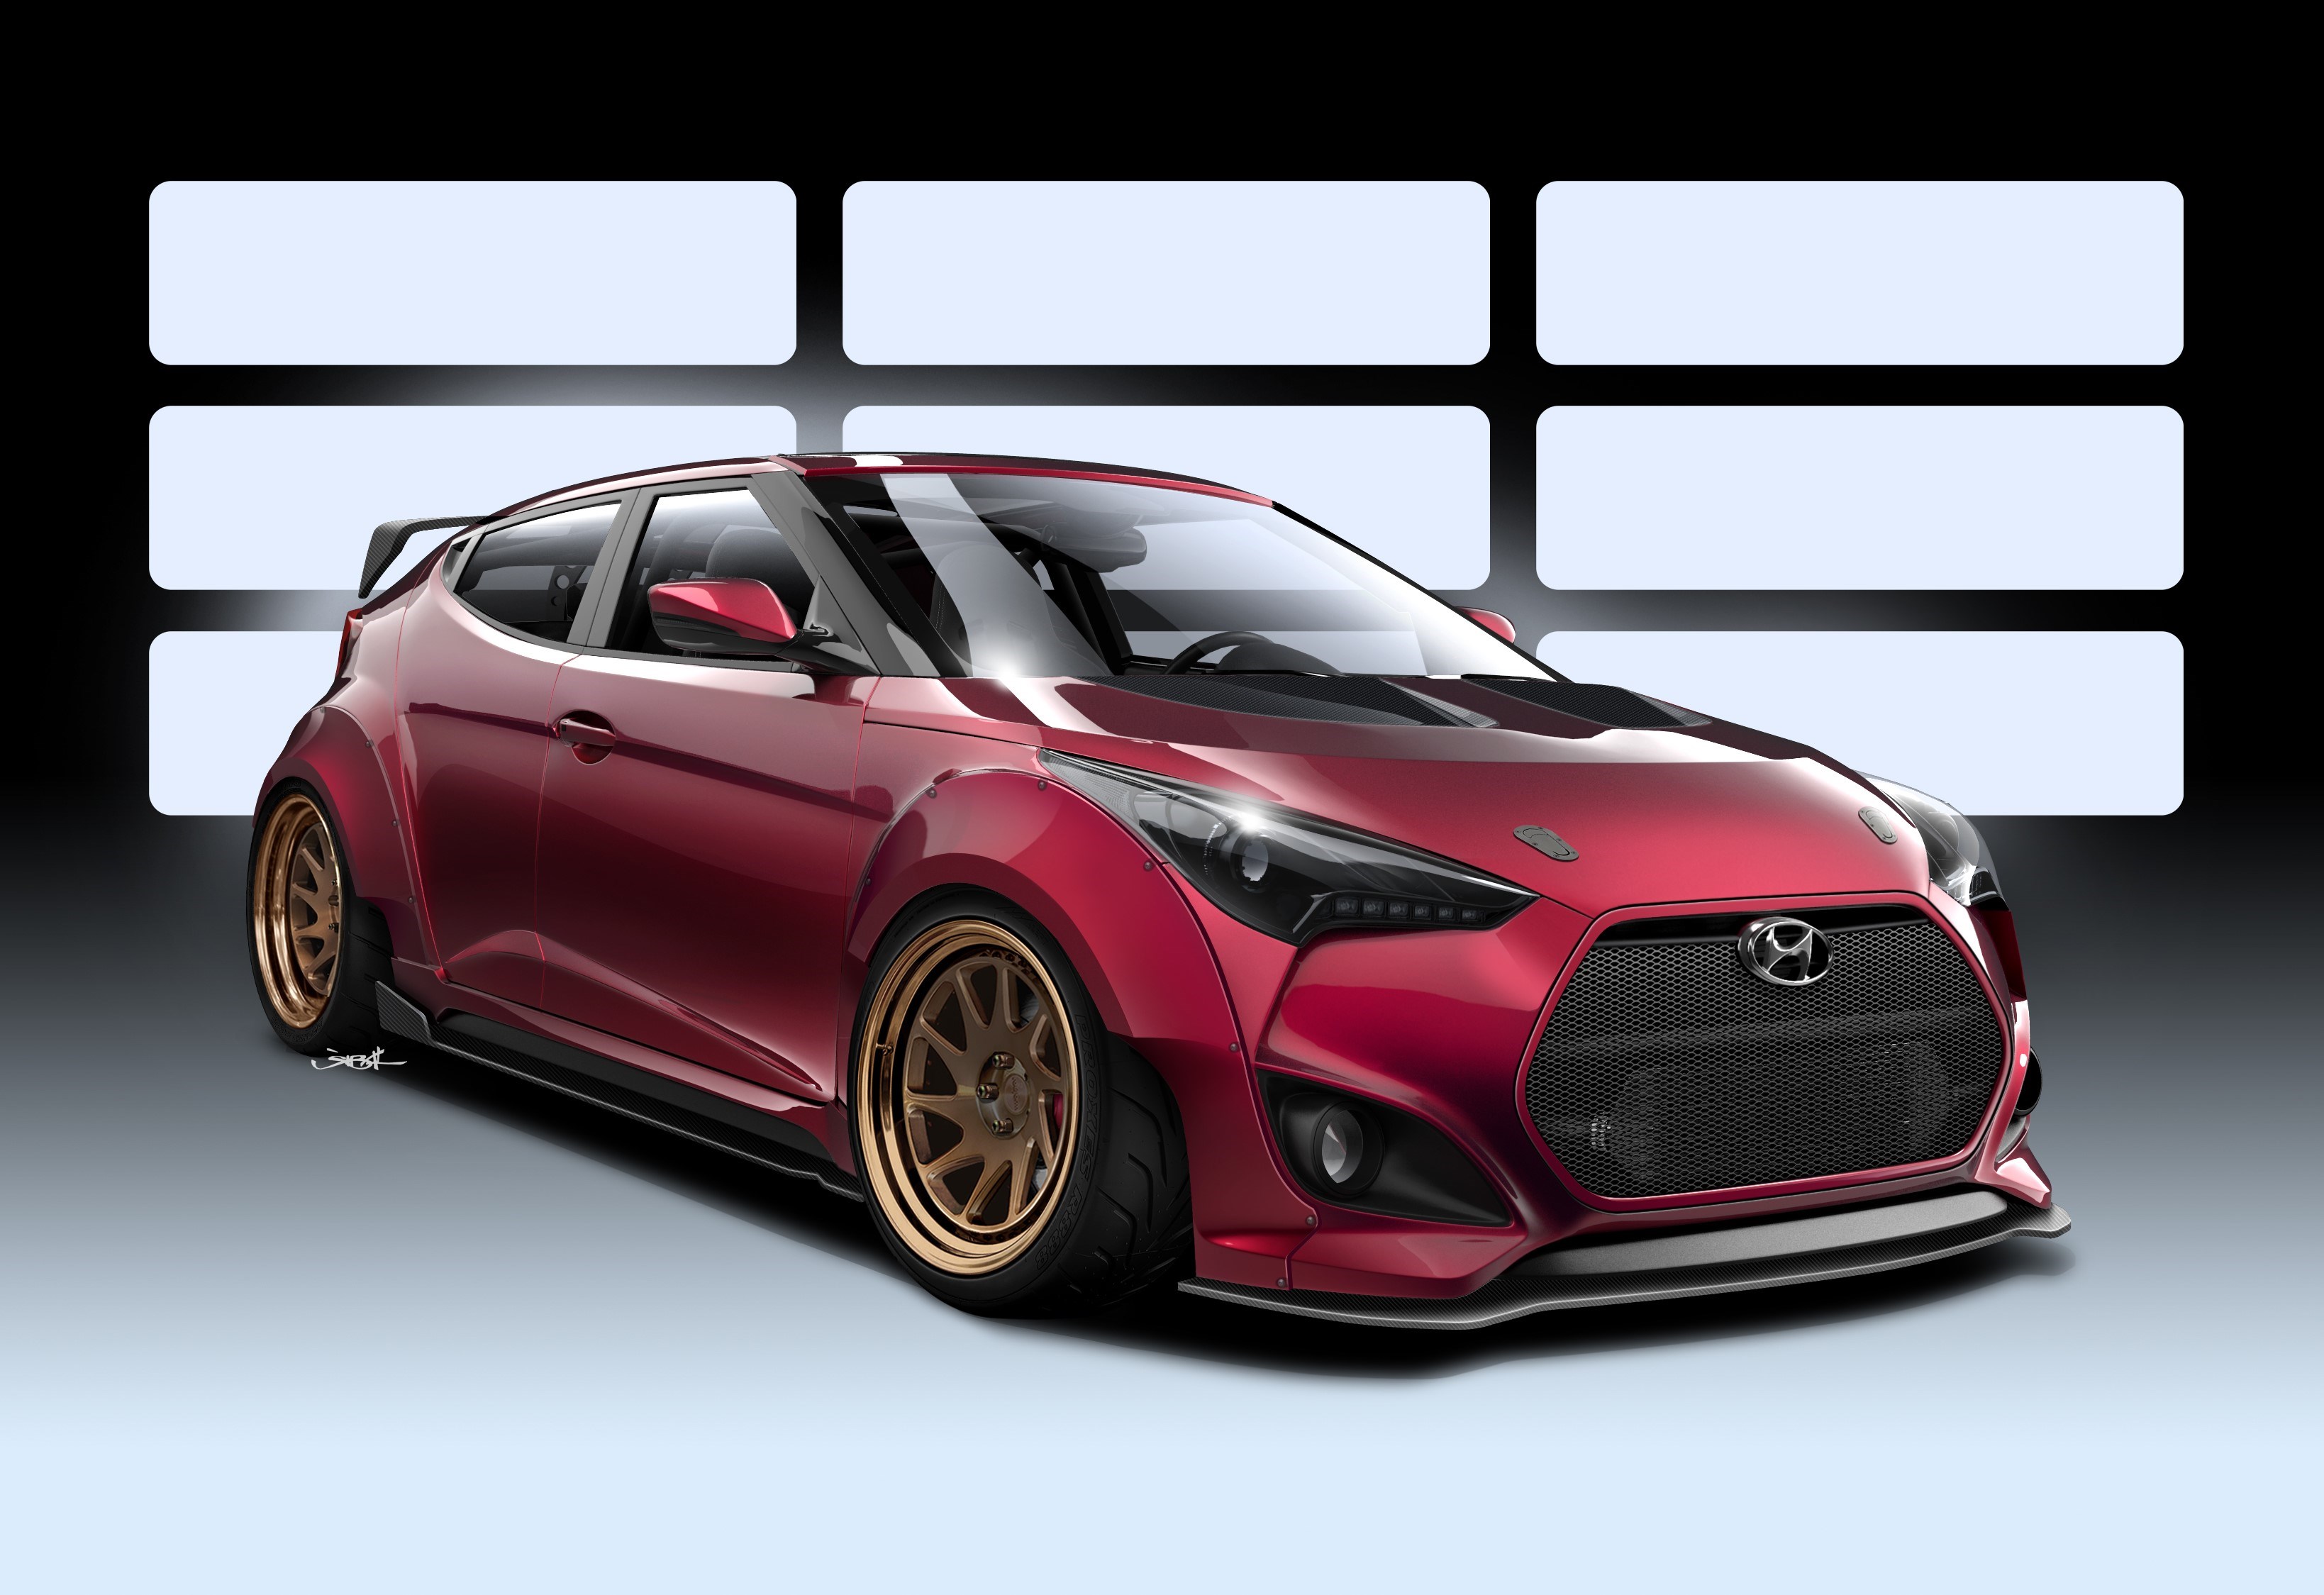 46210_hyundai_and_gurnade_inc_link_up_to_create_race_ready_veloster_concept_for.jpg